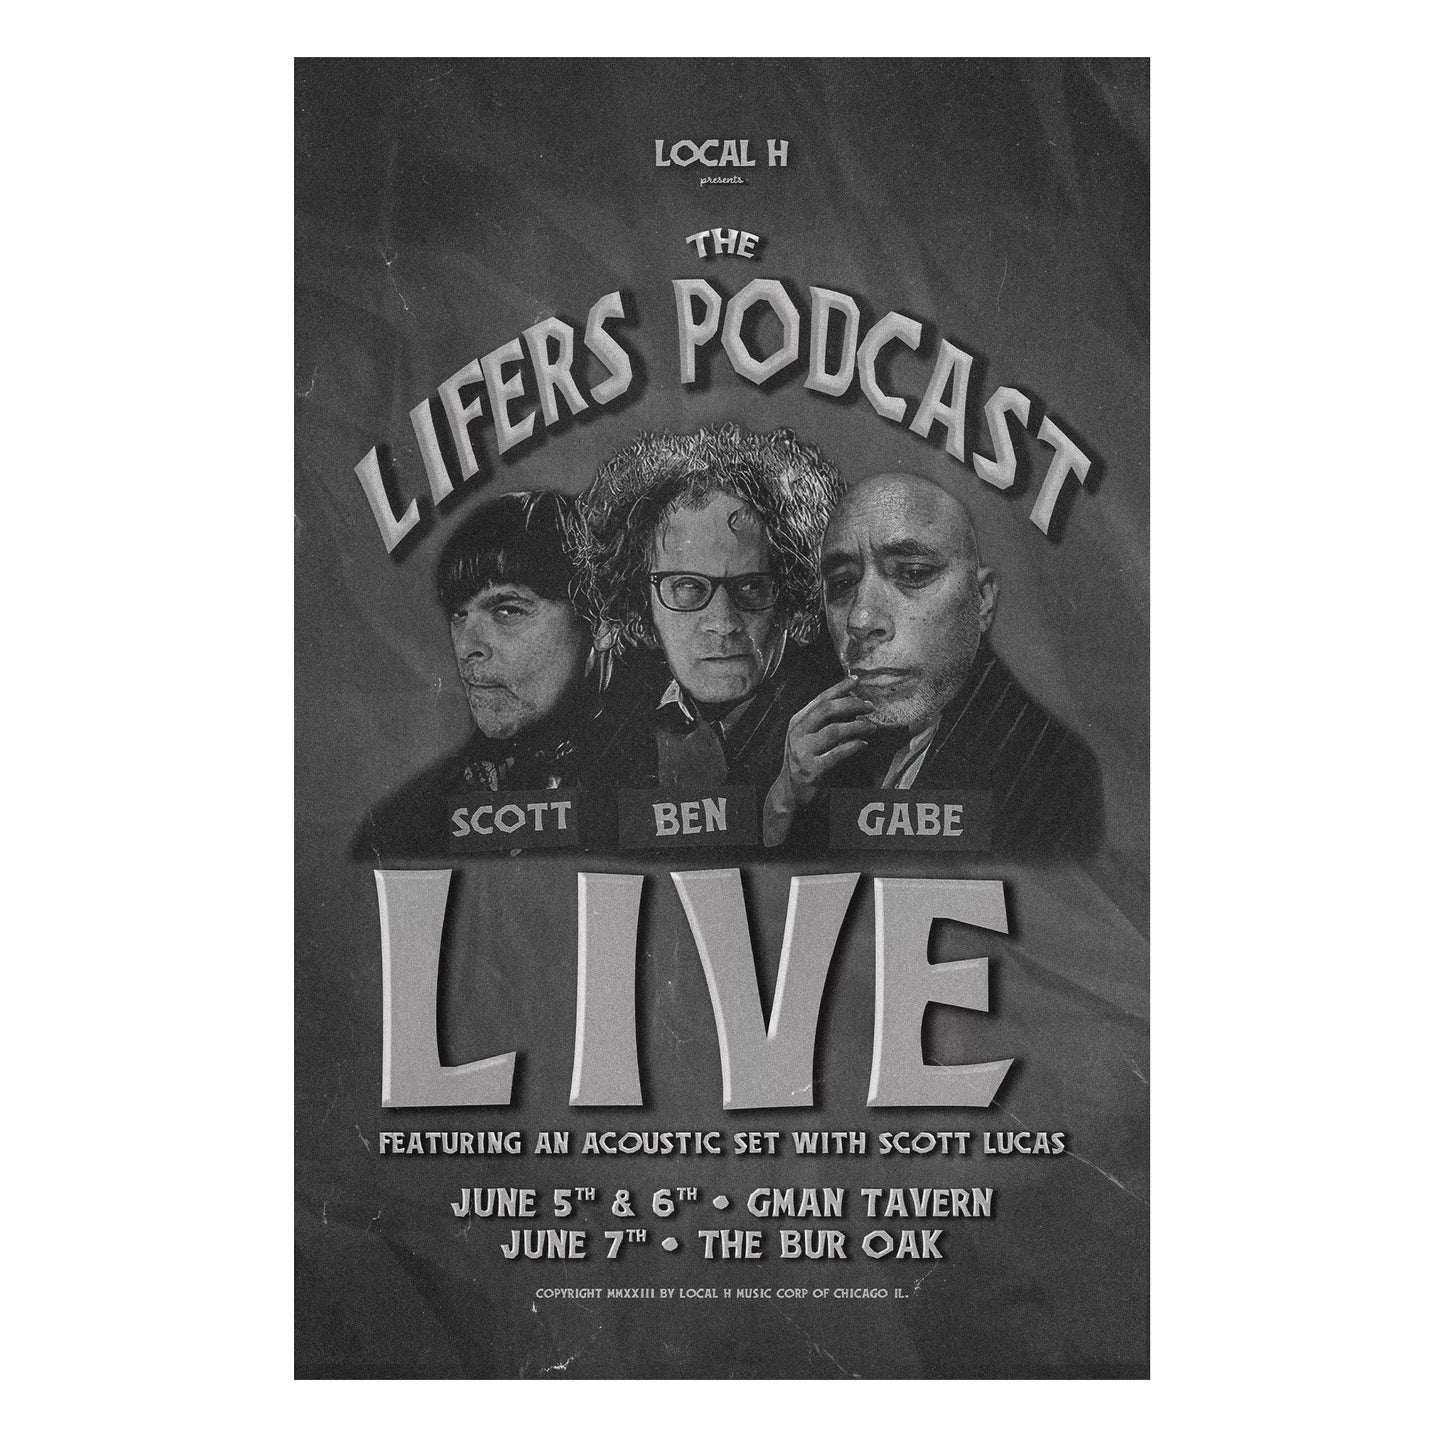 Local H - Poster - The Lifers Podcast Live